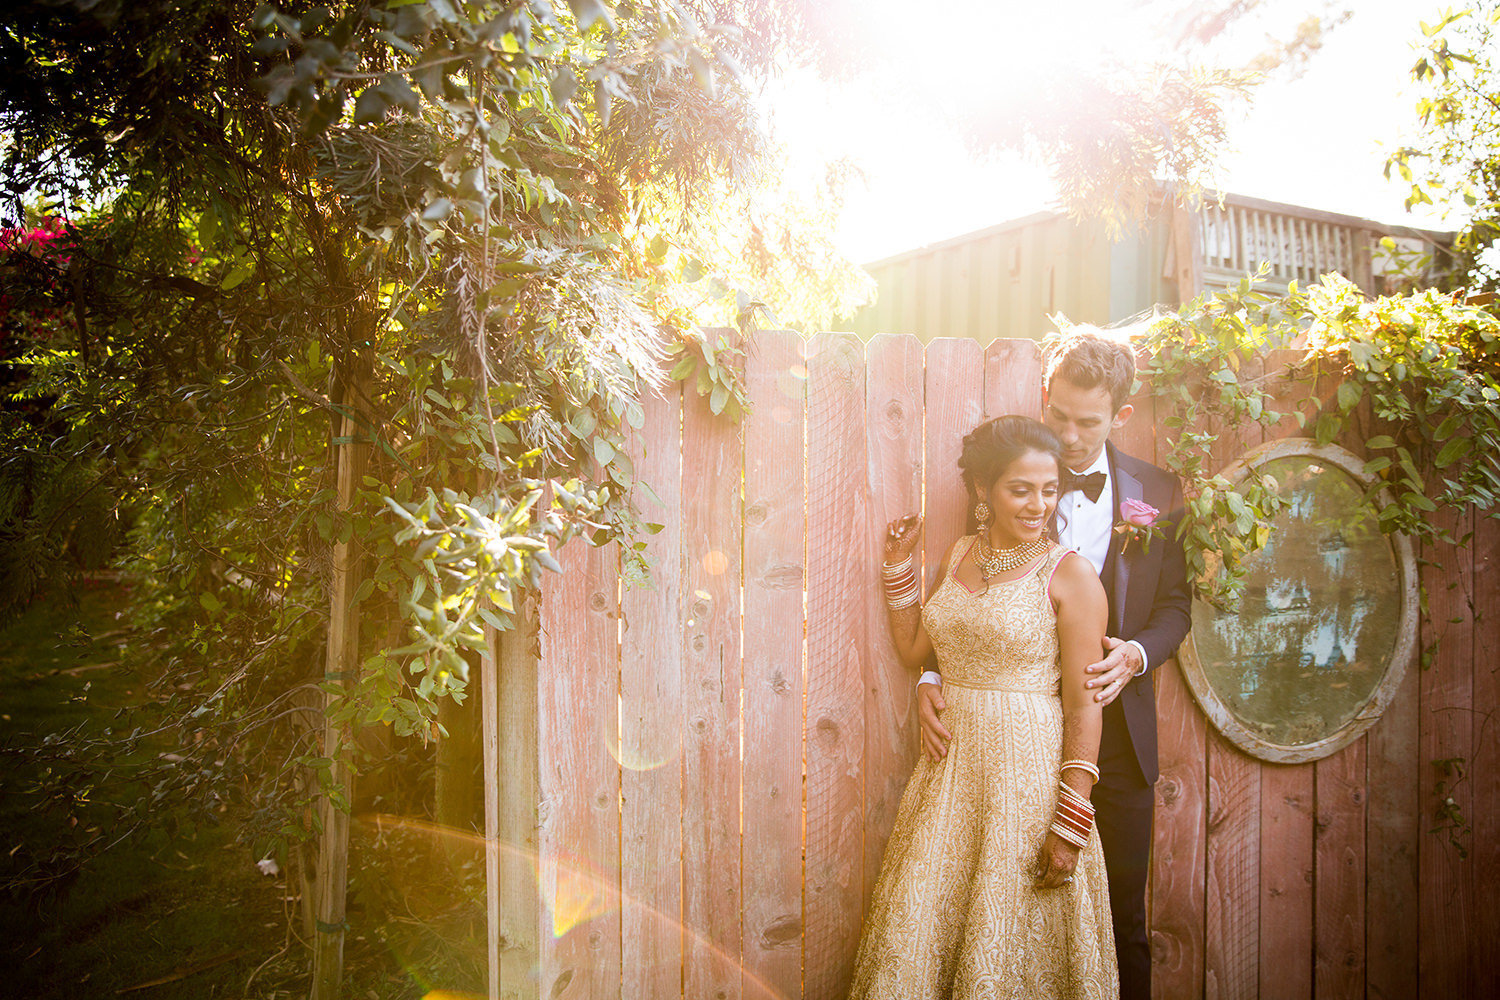 Romantic portrait with lens flare in front of an old fence.